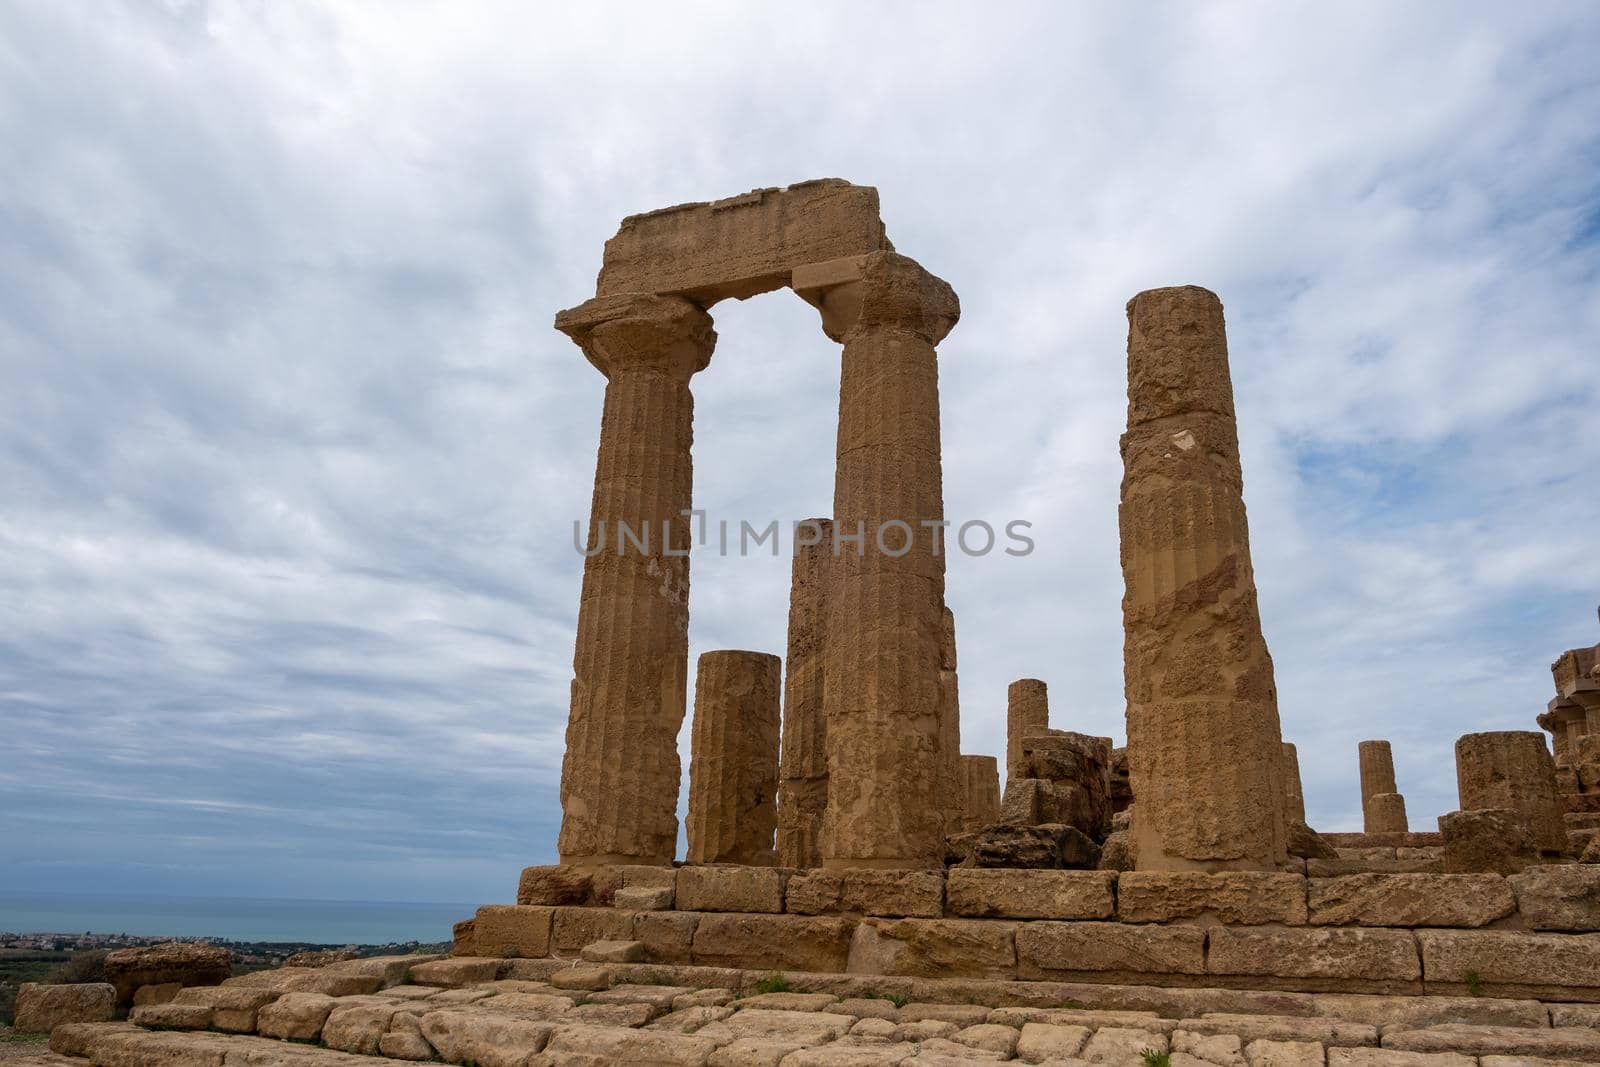 Valley of the Temples at Agrigento Sicily, Italy Europe